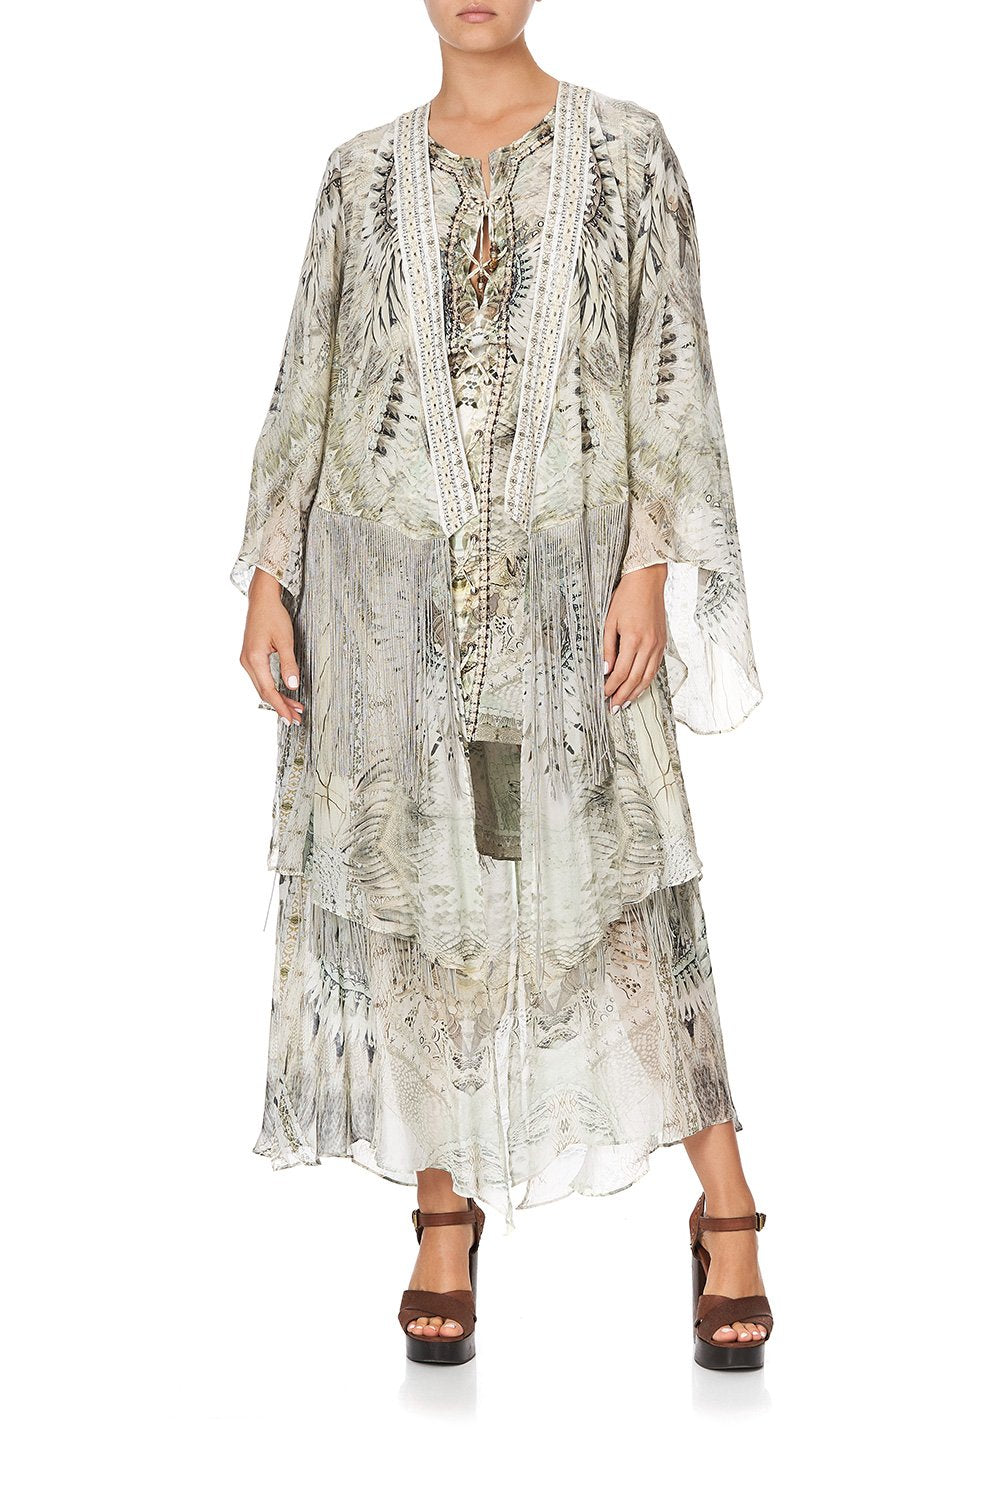 ROBE WITH DOUBLE LAYERED HEM DAINTREE DREAMING